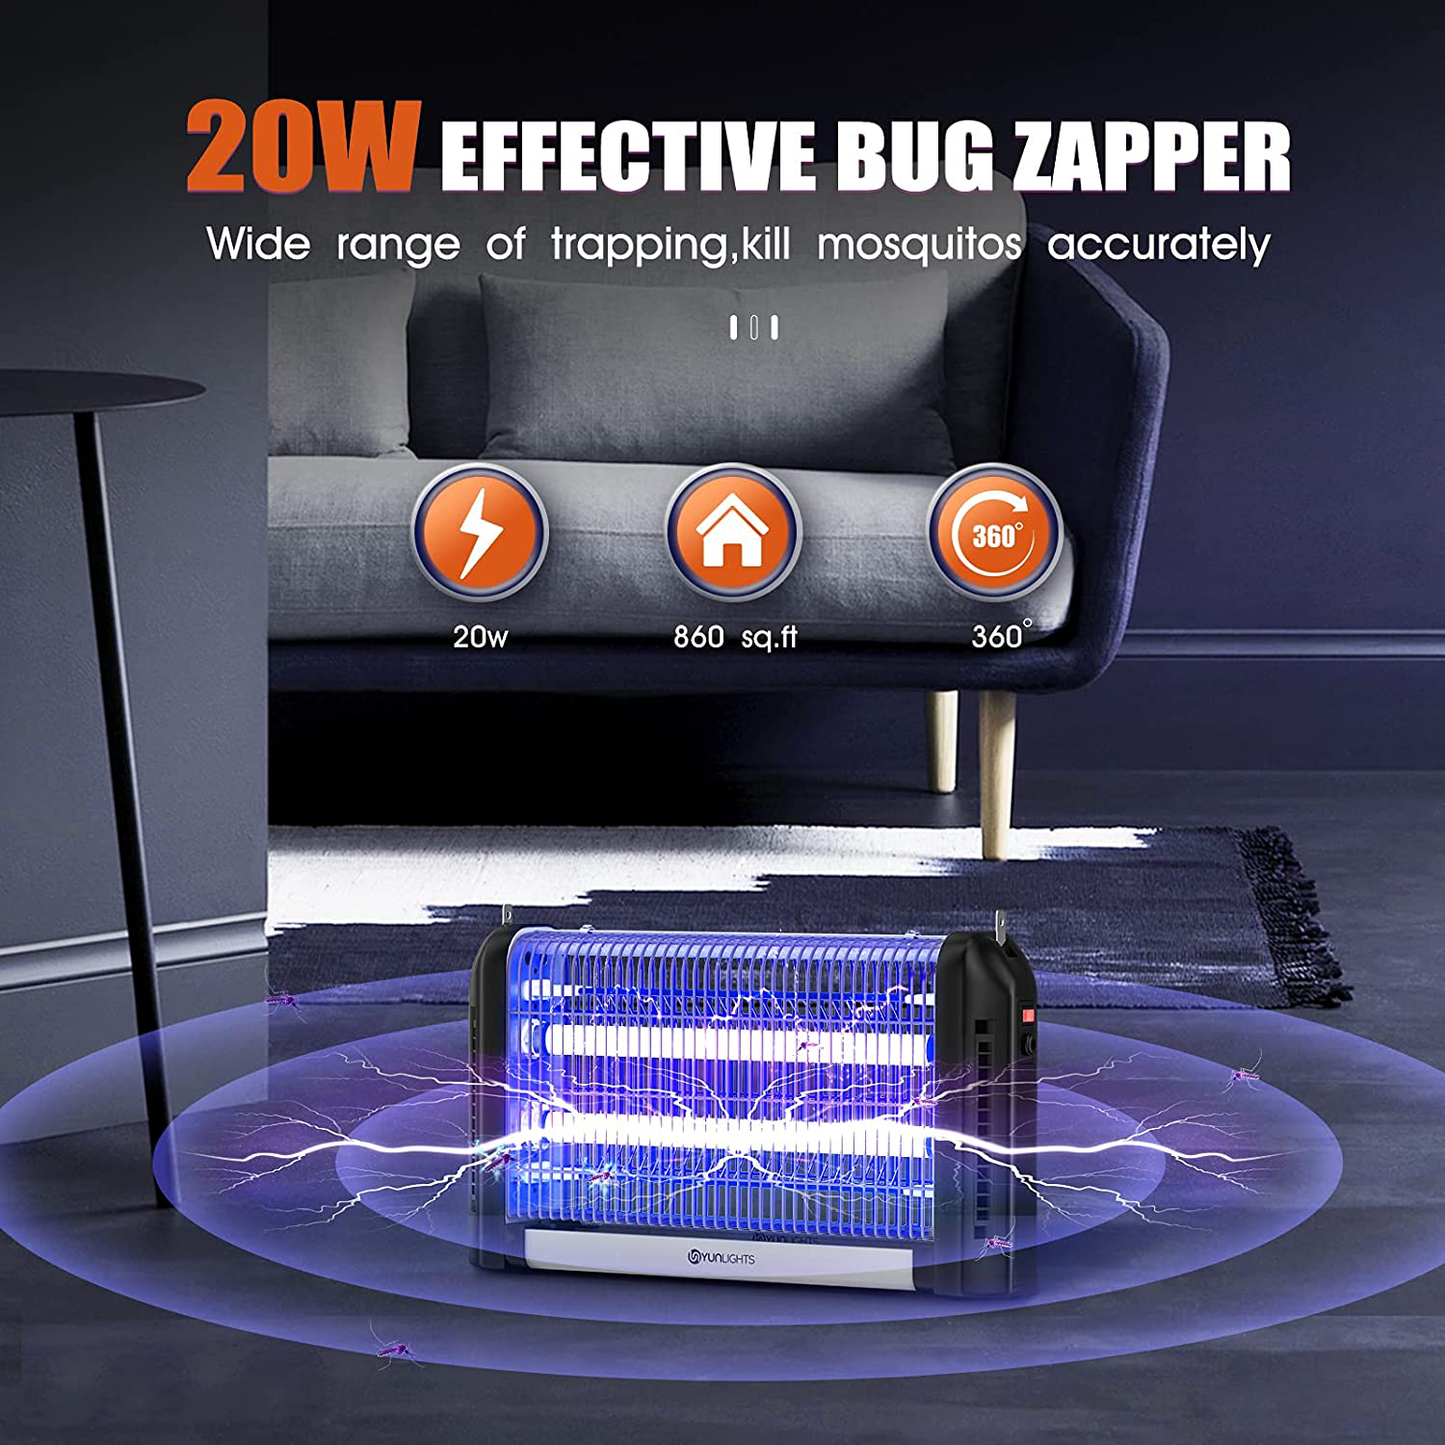 YUNLIGHTS Bug Zapper Outdoor Electric: 20W High Power Mosquito Killer 2800V Fly Trap Hanging UV Light Mosquito Zapper for Indoor Patio Home Garden Backyard